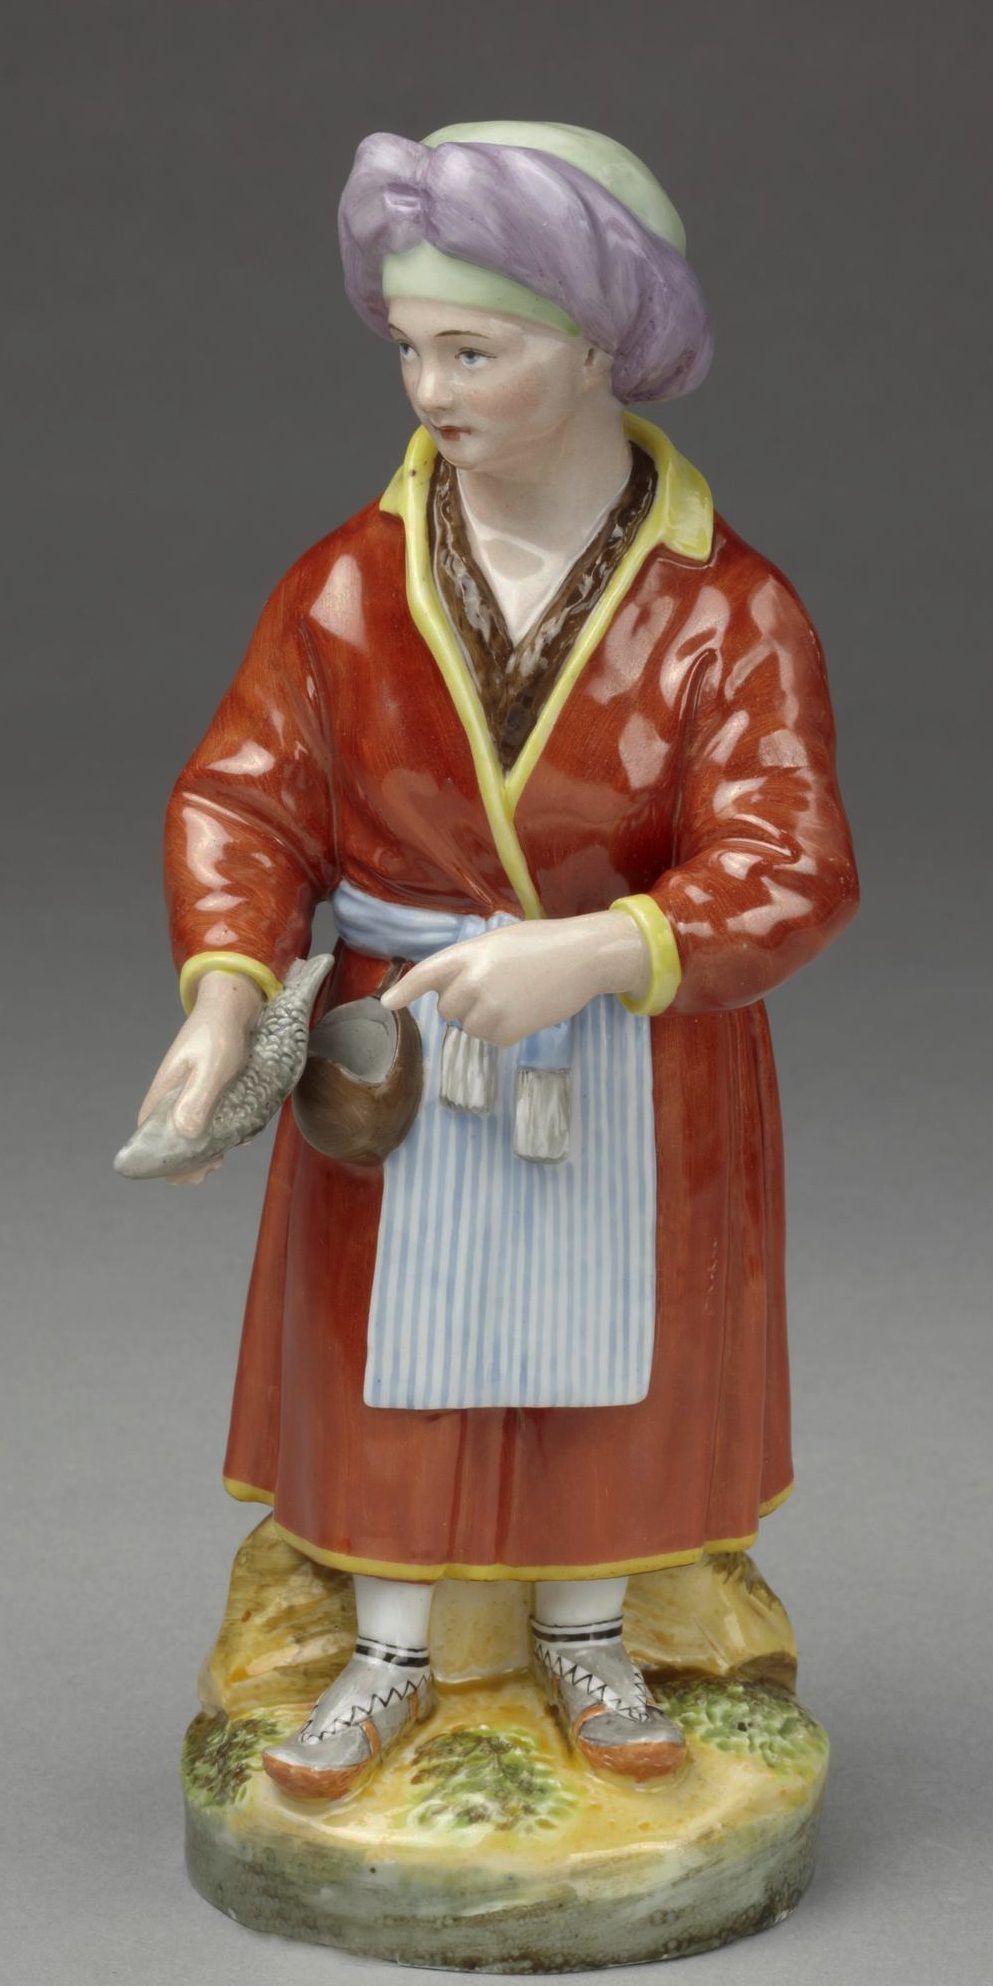 Russian Imperial Porcelain Factory figure "Laplander Woman" by Rachette. Series "People of Russia"